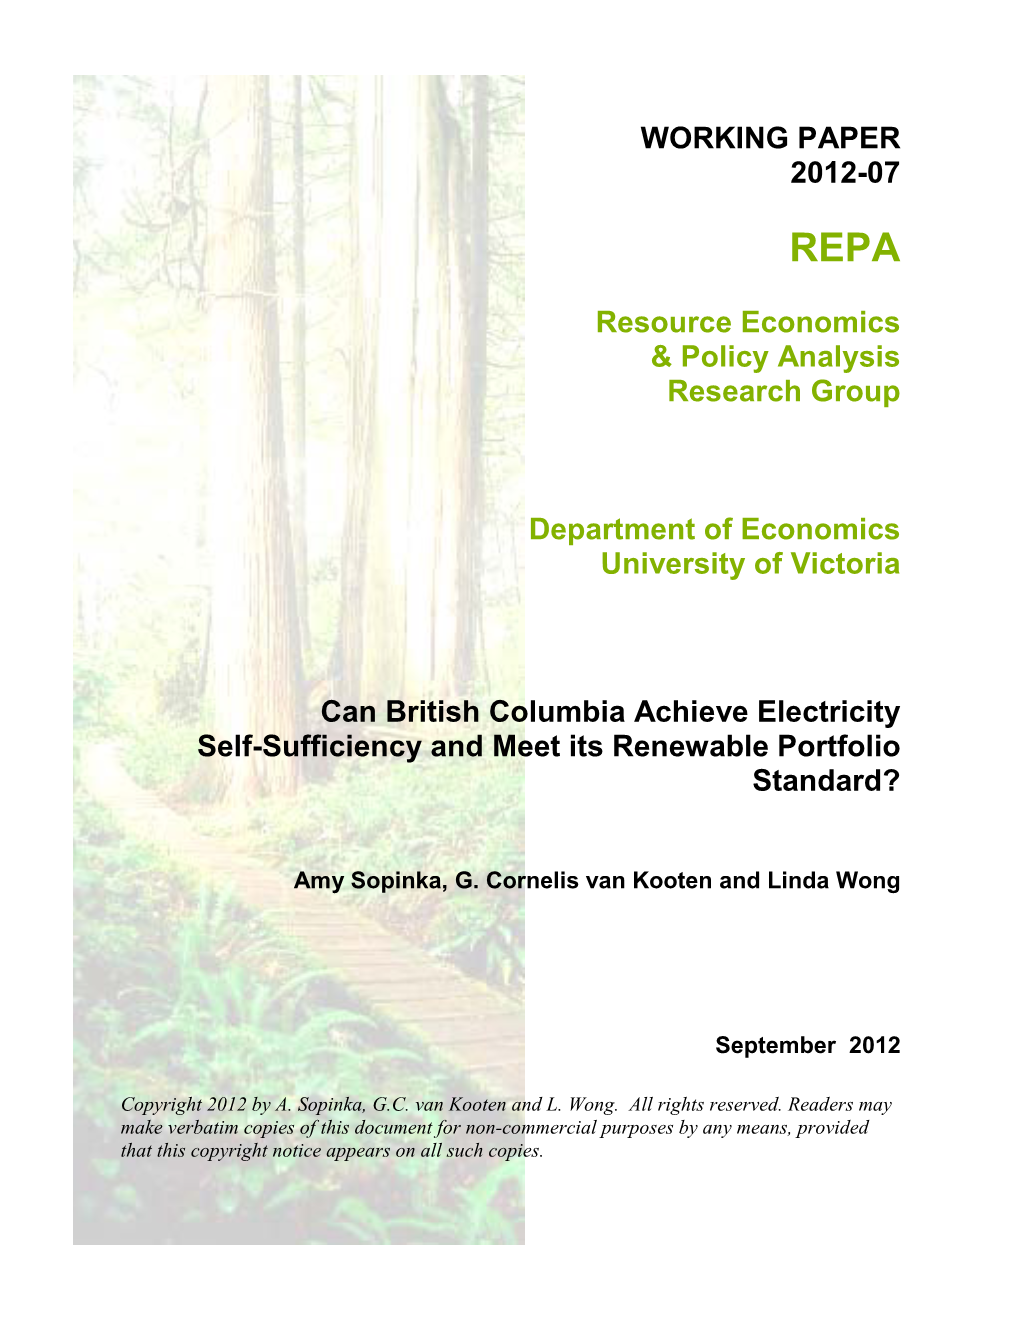 Can British Columbia Achieve Electricity Self-Sufficiency and Meet Its Renewable Portfolio Standard?